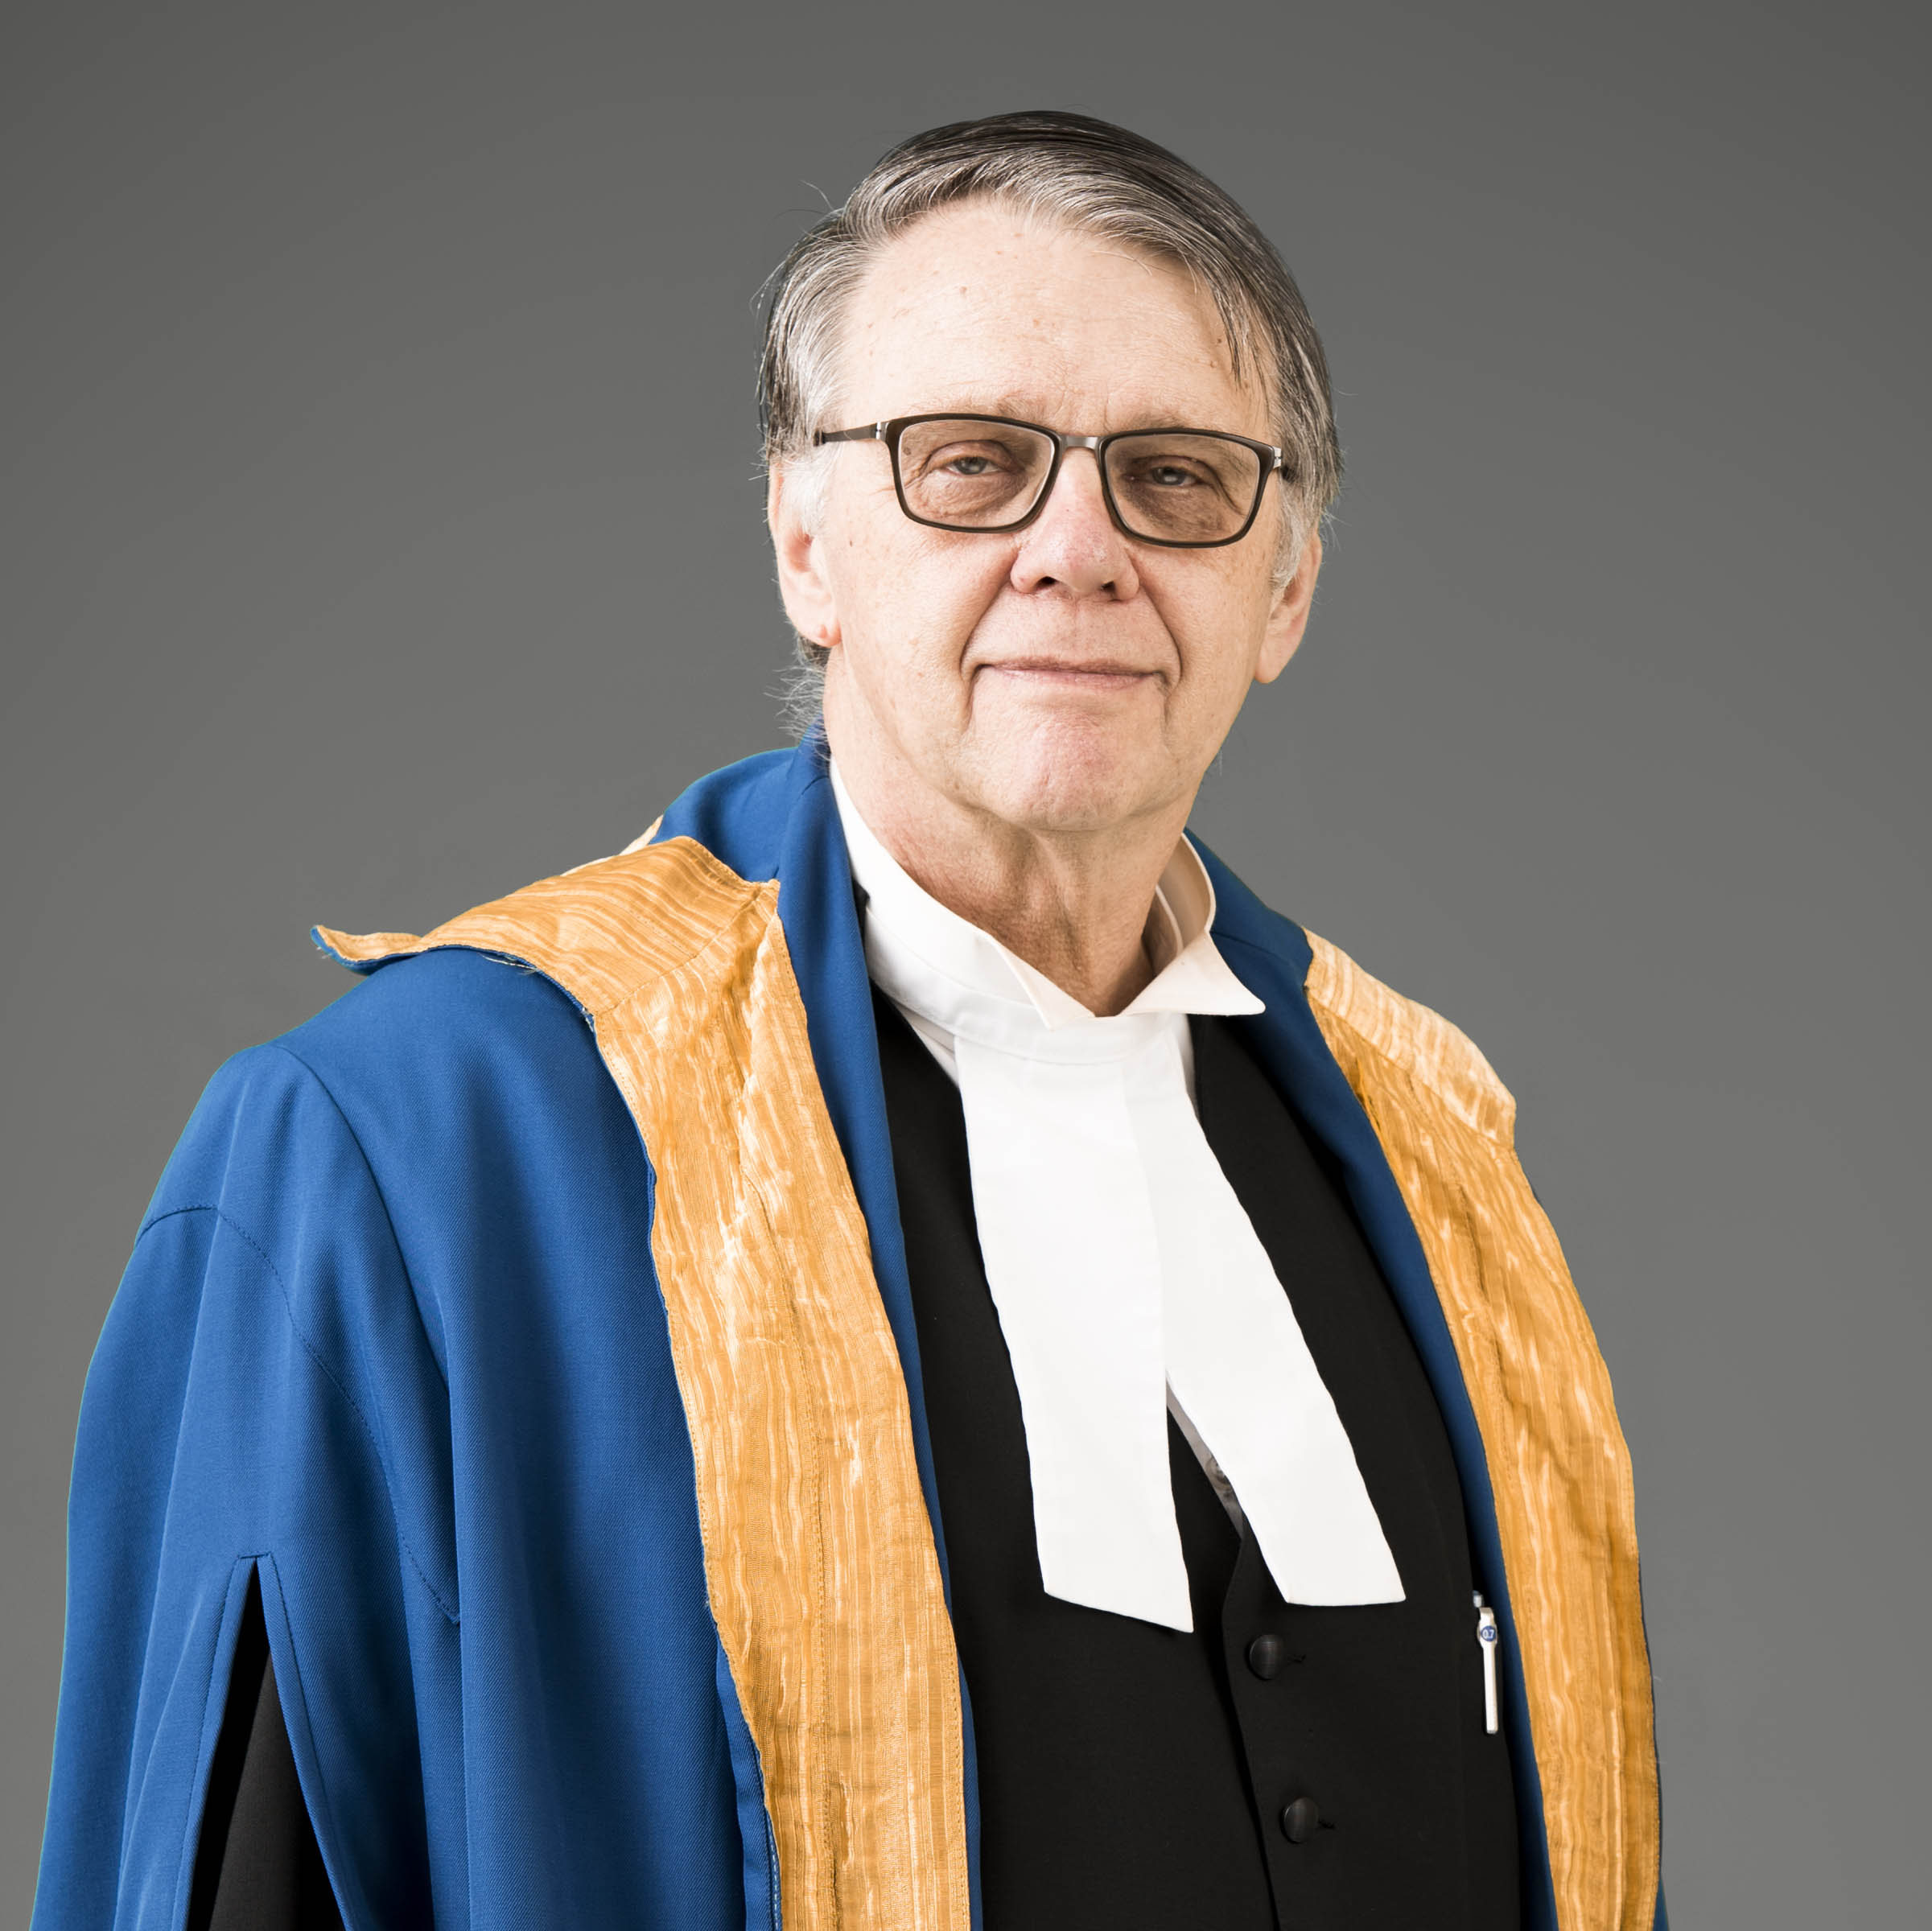 The Honourable Mr. Justice Jacob Wit